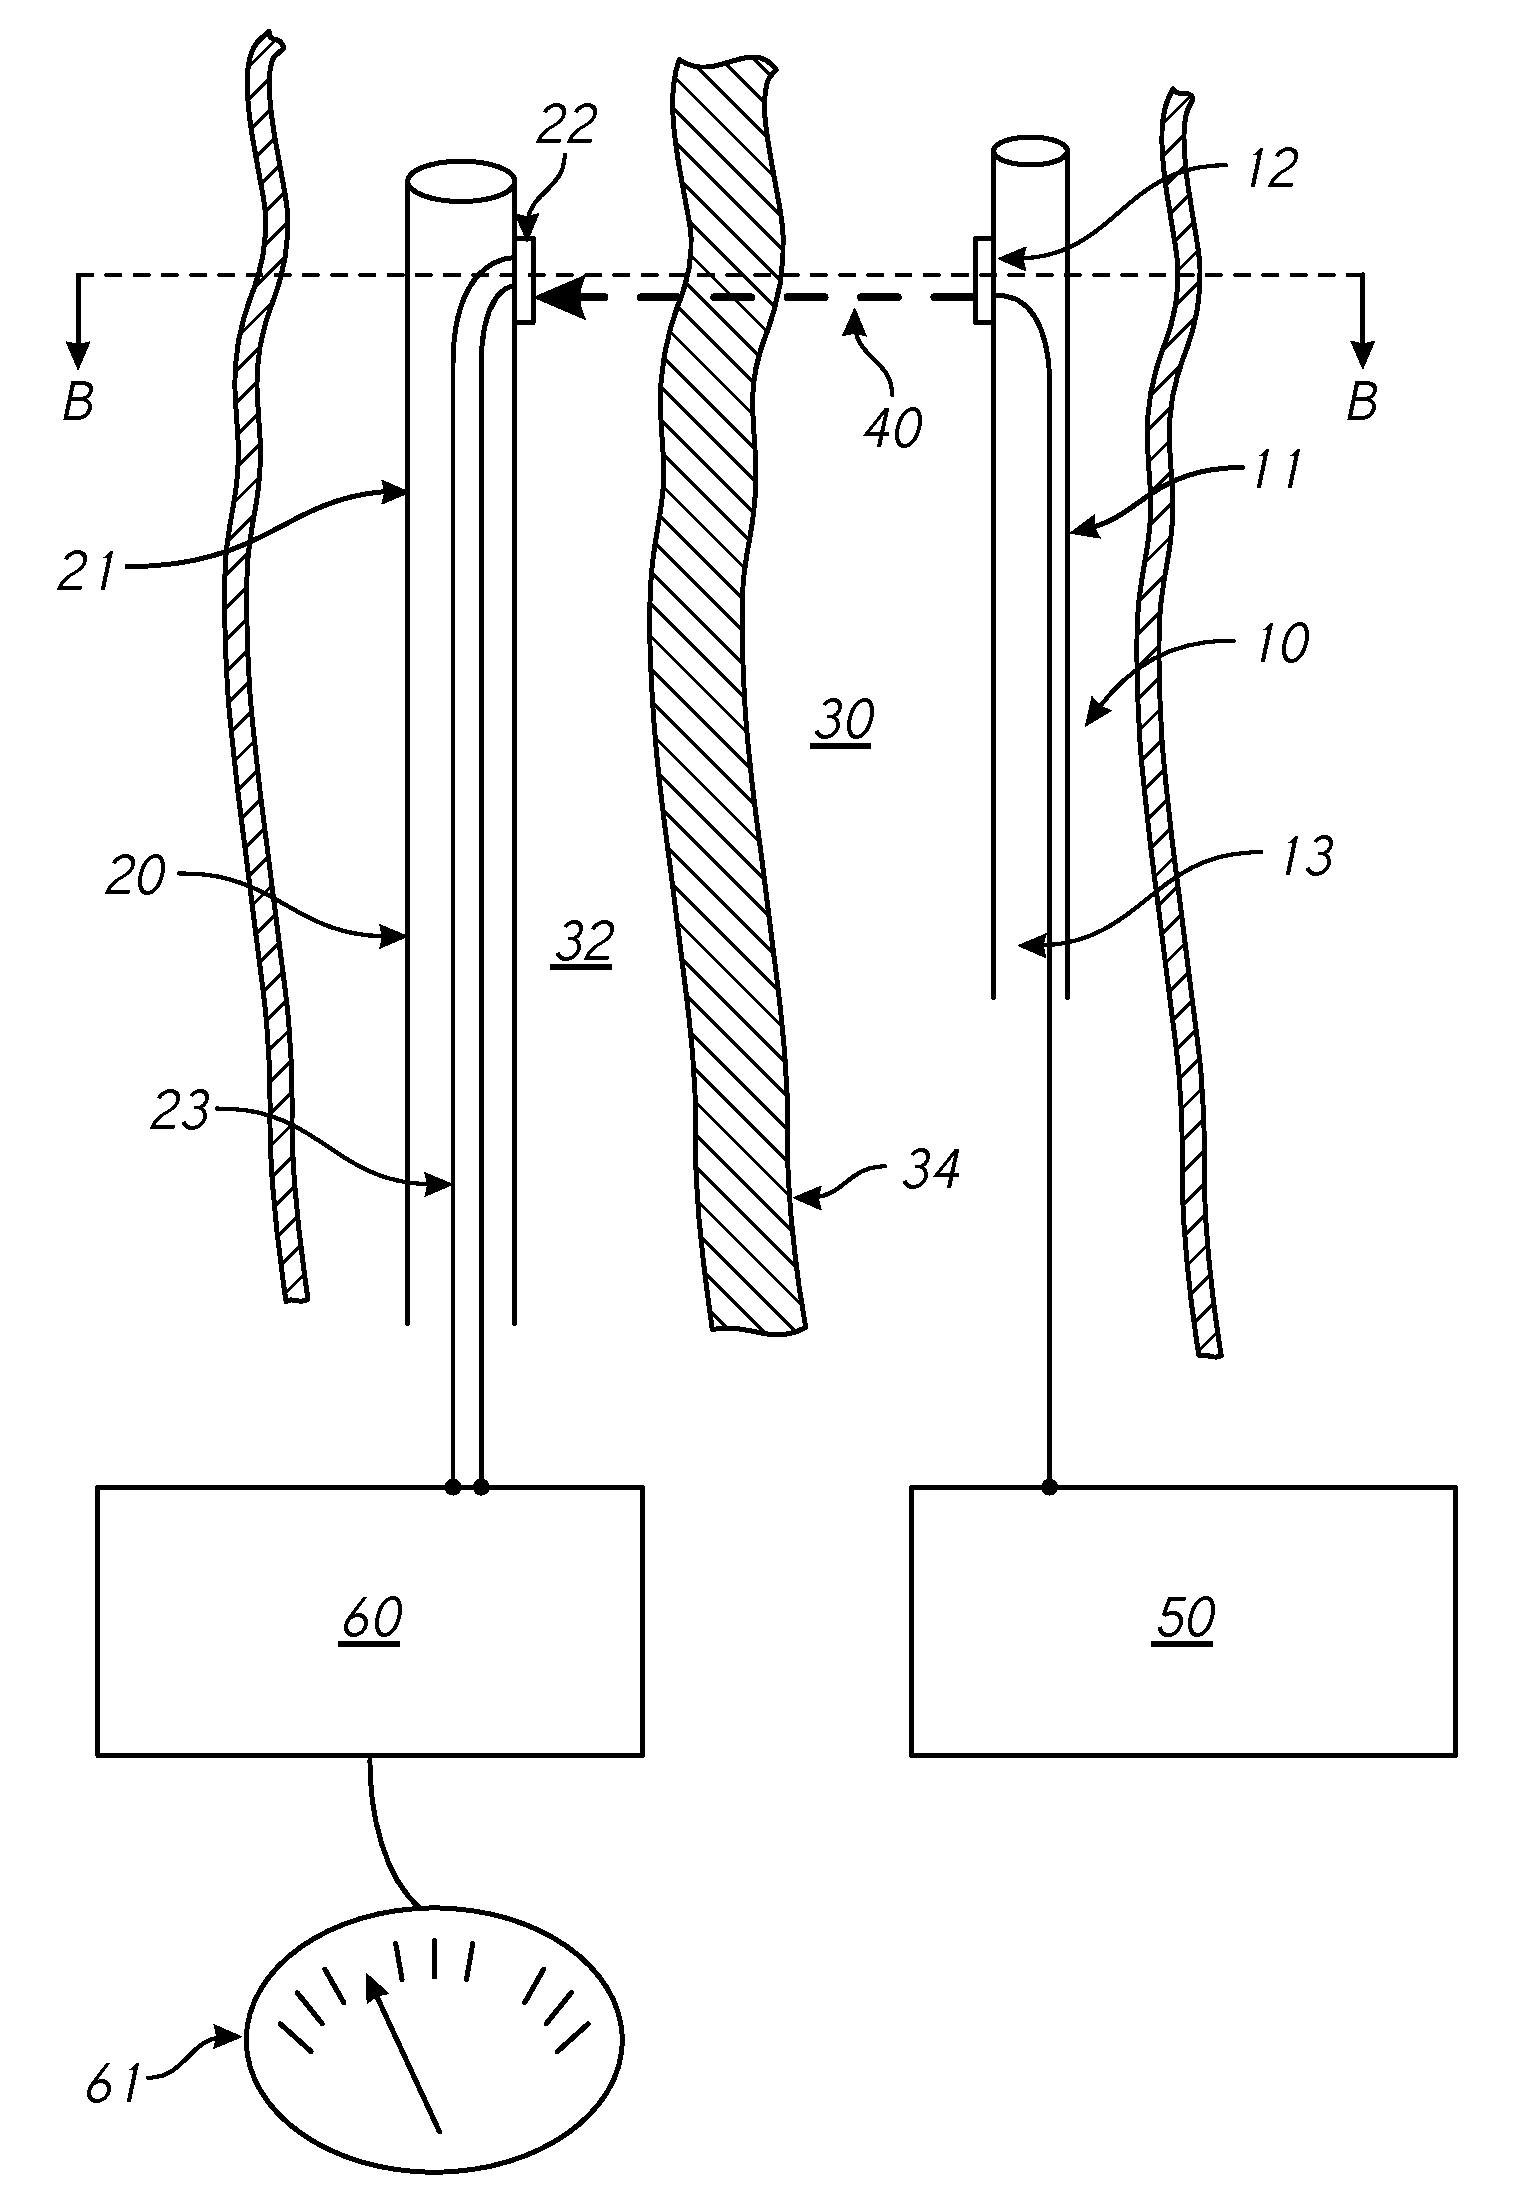 Methods and systems for providing or maintaining fluid flow through body passages